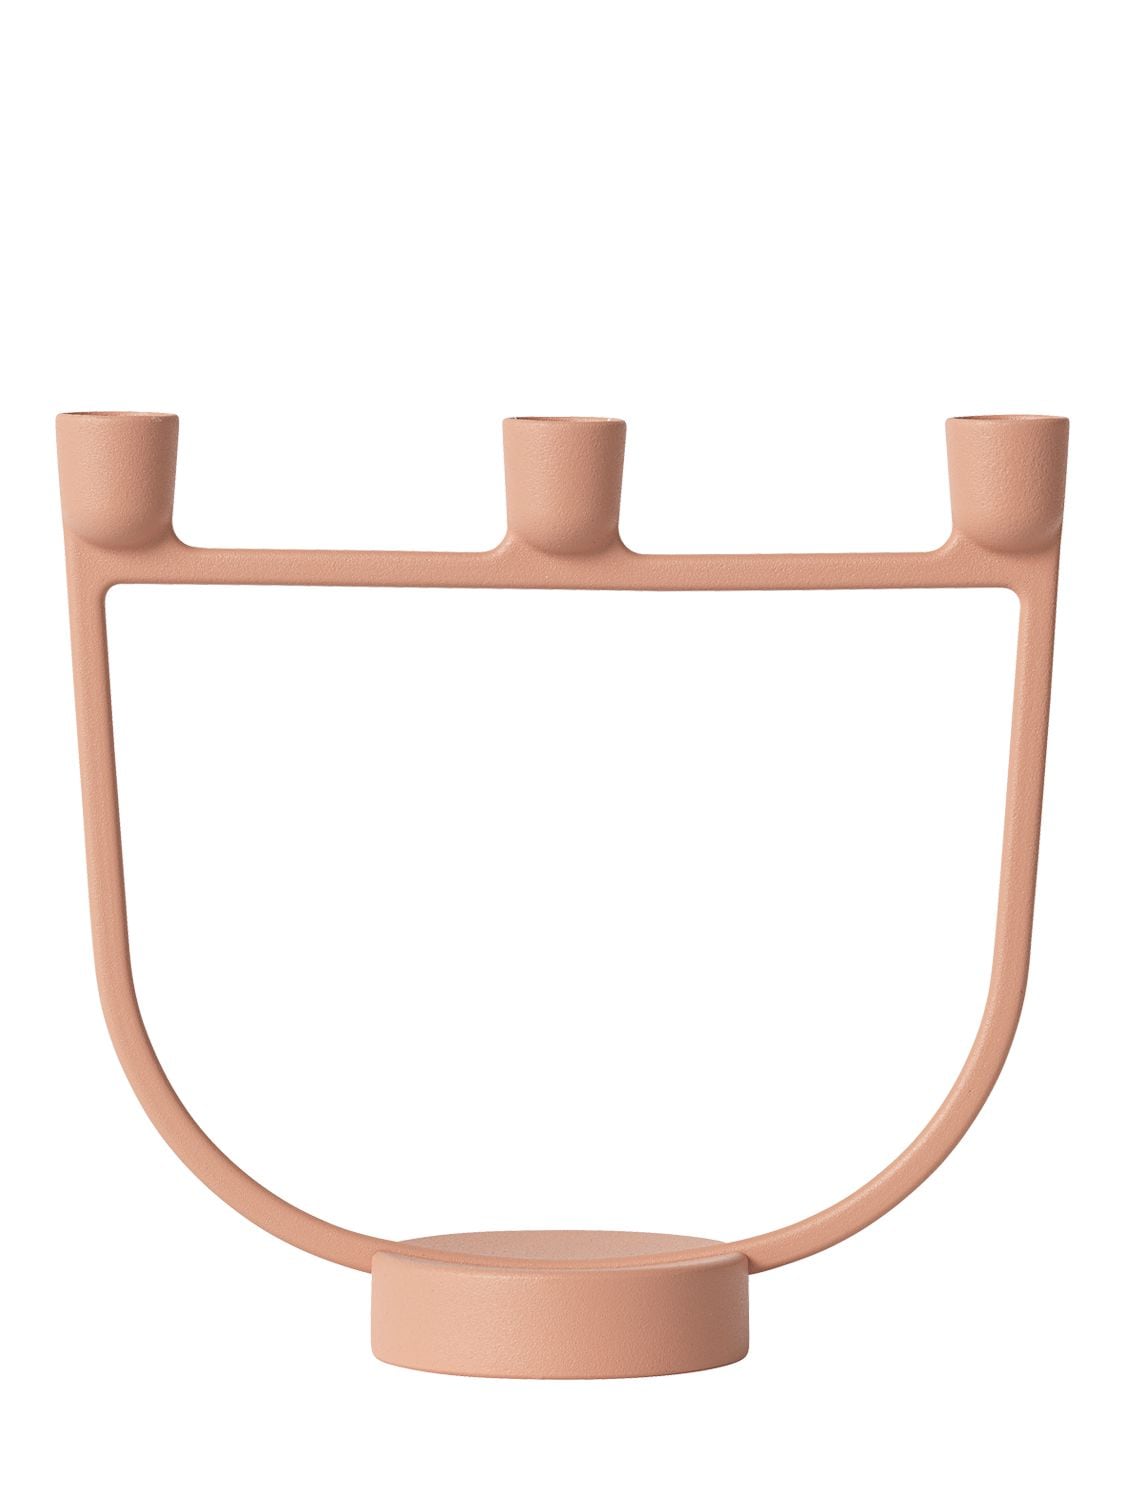 Muuto Open Candle Holder In Brown